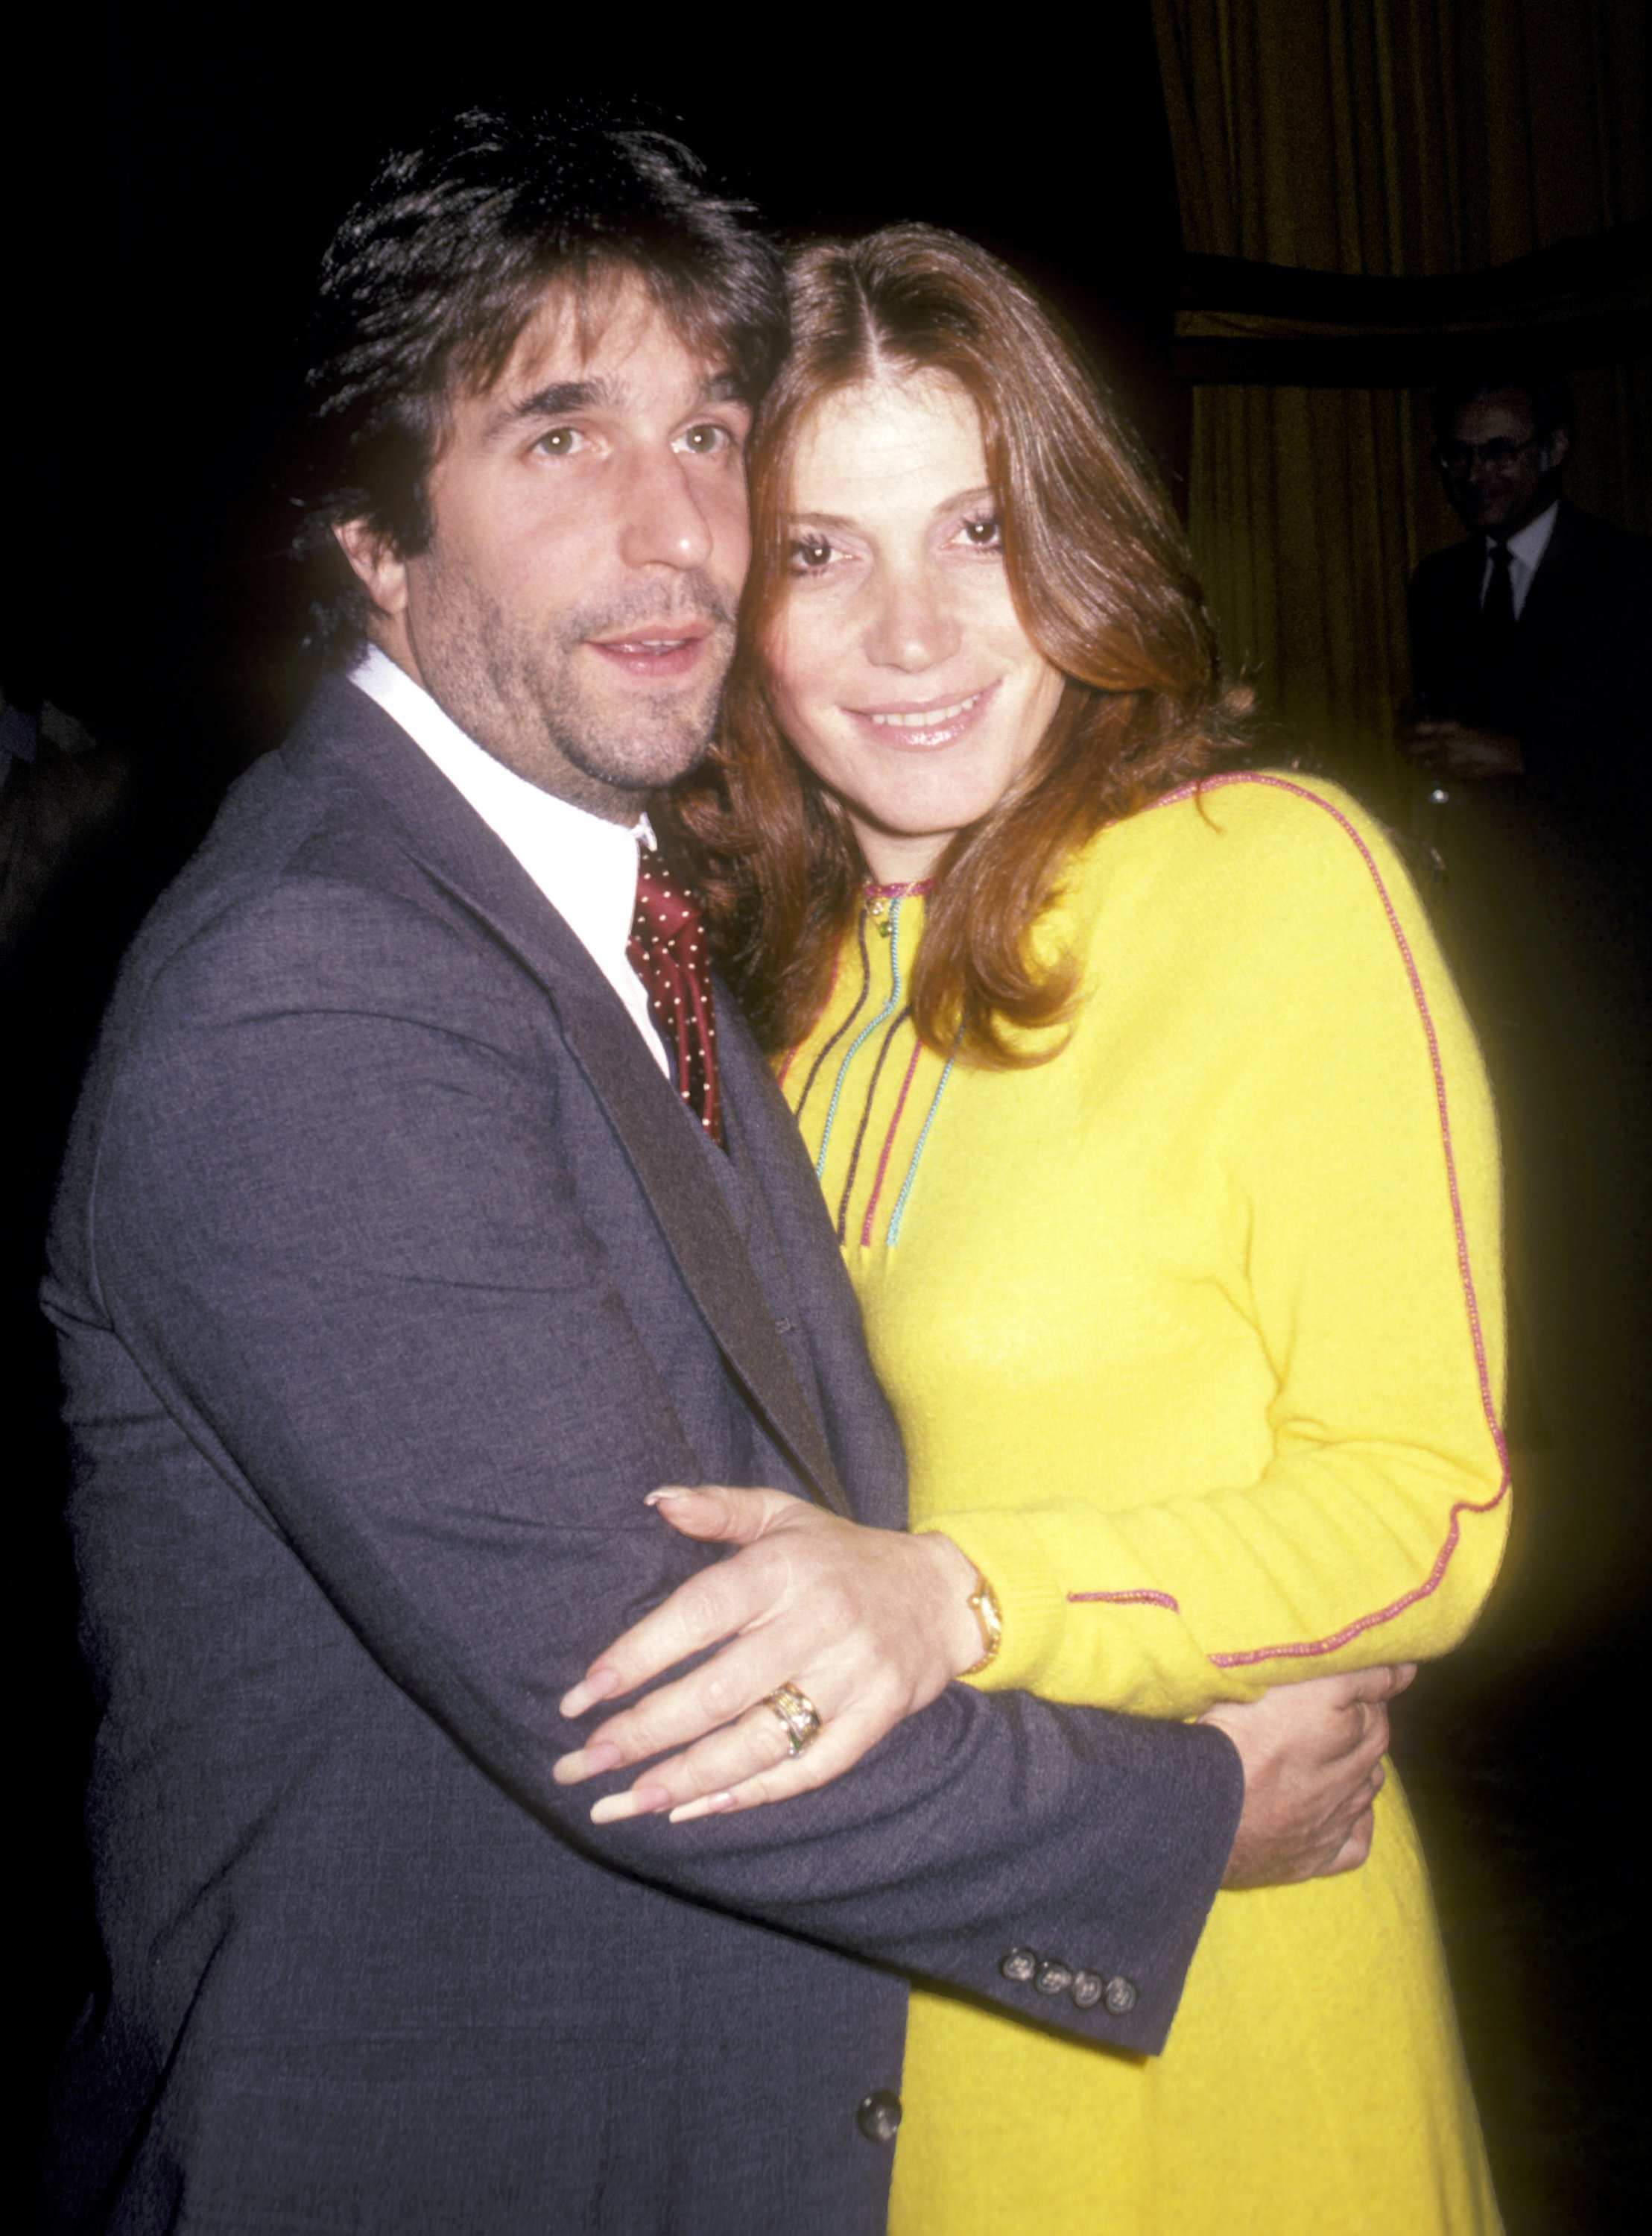 Henry Winkler and wife Stacey attend the Third Annual Media Awards on January 22, 1981 at Beverly Hilton Hotel in Beverly Hills, California | Source: Getty Images 